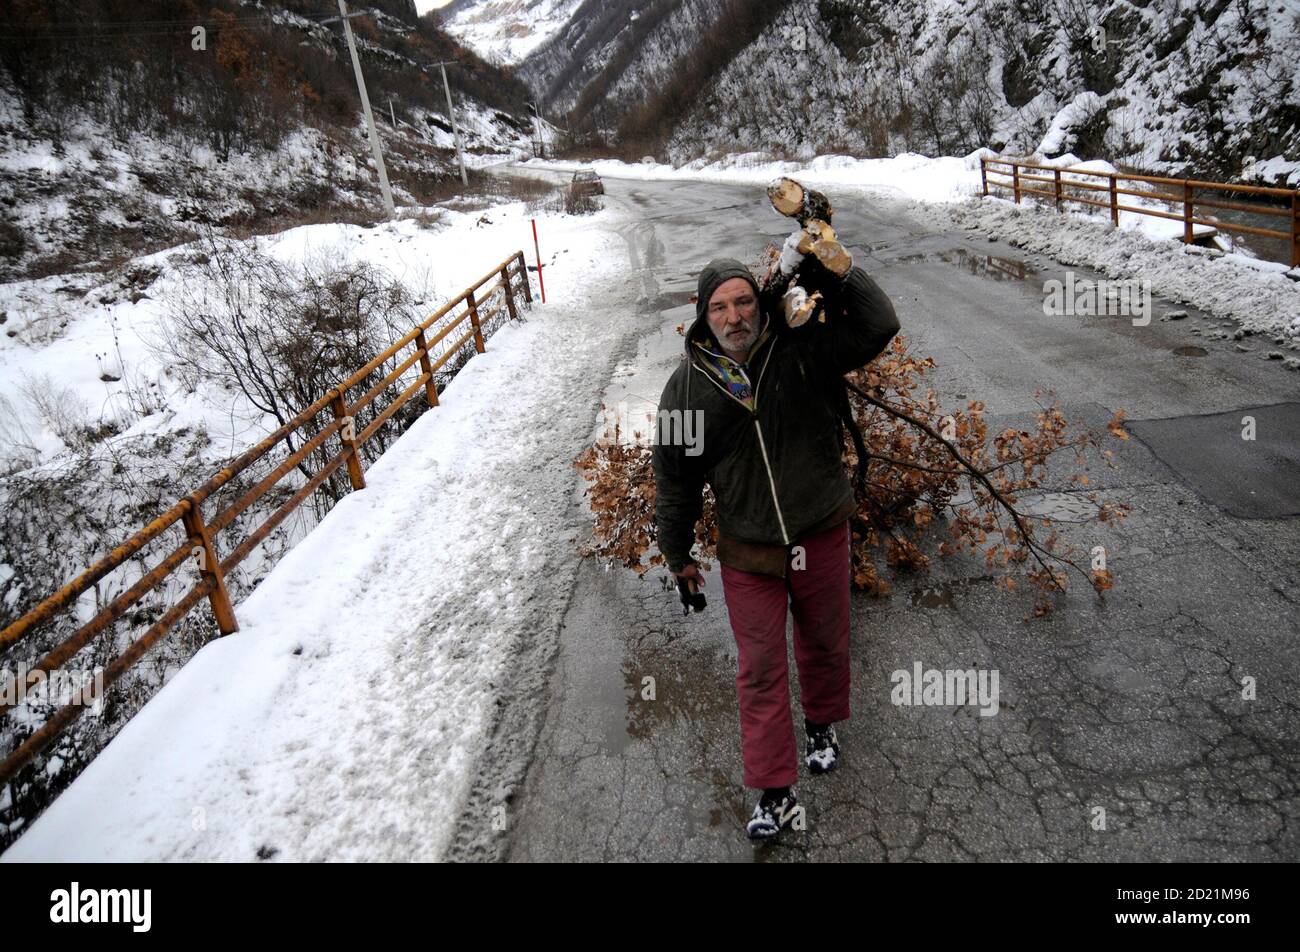 Bosnian Croat Zarko Hrgic, 51, carries wood from forest in the village of Babino January 31, 2010. Hrgic has been living in a cave for three years in Babino near the central Bosnian town of Zenica, 50 miles northeast of Sarajevo , where the temperature in the village dips to minus 17 degrees Celsius at night. He makes a living by selling wood for 15 euros ($20.80) per metre.  REUTERS/Dado Ruvic (BOSNIA AND HERZEGOVINA - Tags: SOCIETY ENVIRONMENT) Stock Photo